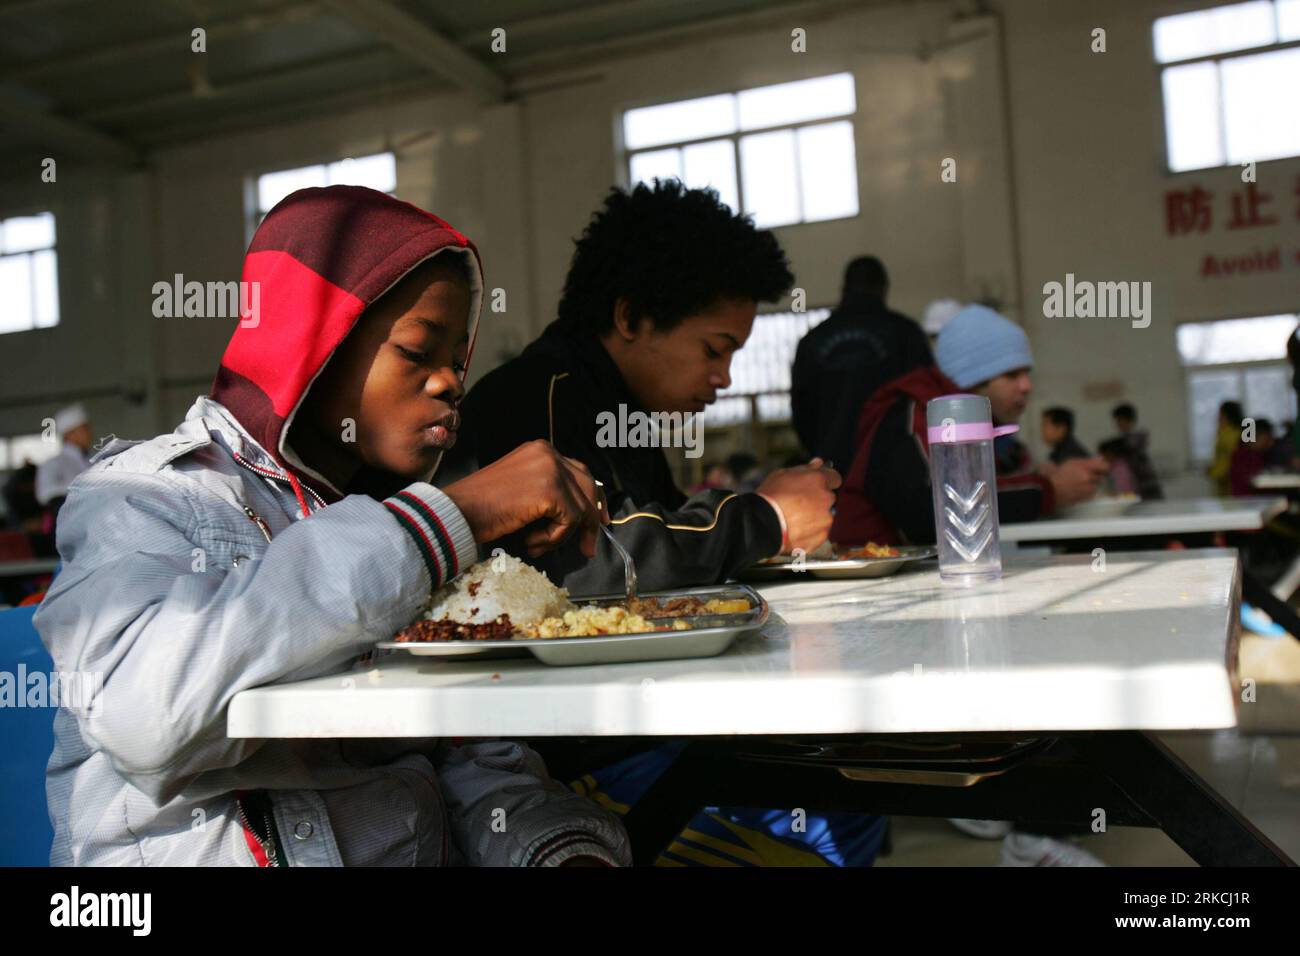 Bildnummer: 54769813  Datum: 23.12.2010  Copyright: imago/Xinhua (101225) -- WUQIAO, Dec. 25, 2010 (Xinhua) -- Randolph (L) from Liberia and Marvine from Mauritius have lunch at Wuqiao acrobatic art school in Wuqiao County, north China s Hebei Province, Dec. 23, 2010. Under the Chinese government-sponsored exchange programs, twenty-four students from five African and Asian countries, including Egypt, Nigeria, Liberia, Mauritius and Myanmar, began in November their one-year training of acrobatics in Wuqiao Acrobatics Arts School, a vocational school well-known for its acrobatics performance in Stock Photo